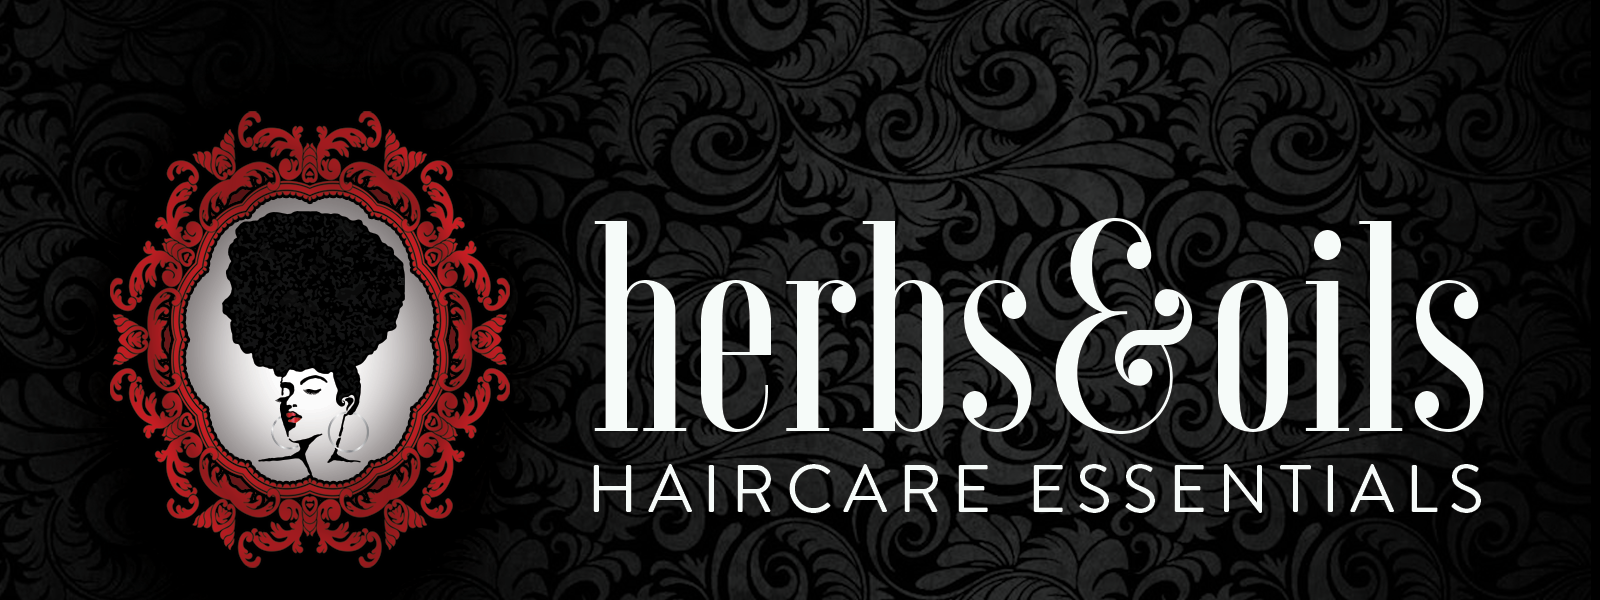 Herbs and Oils Haircare Essentials, products made for hair health.